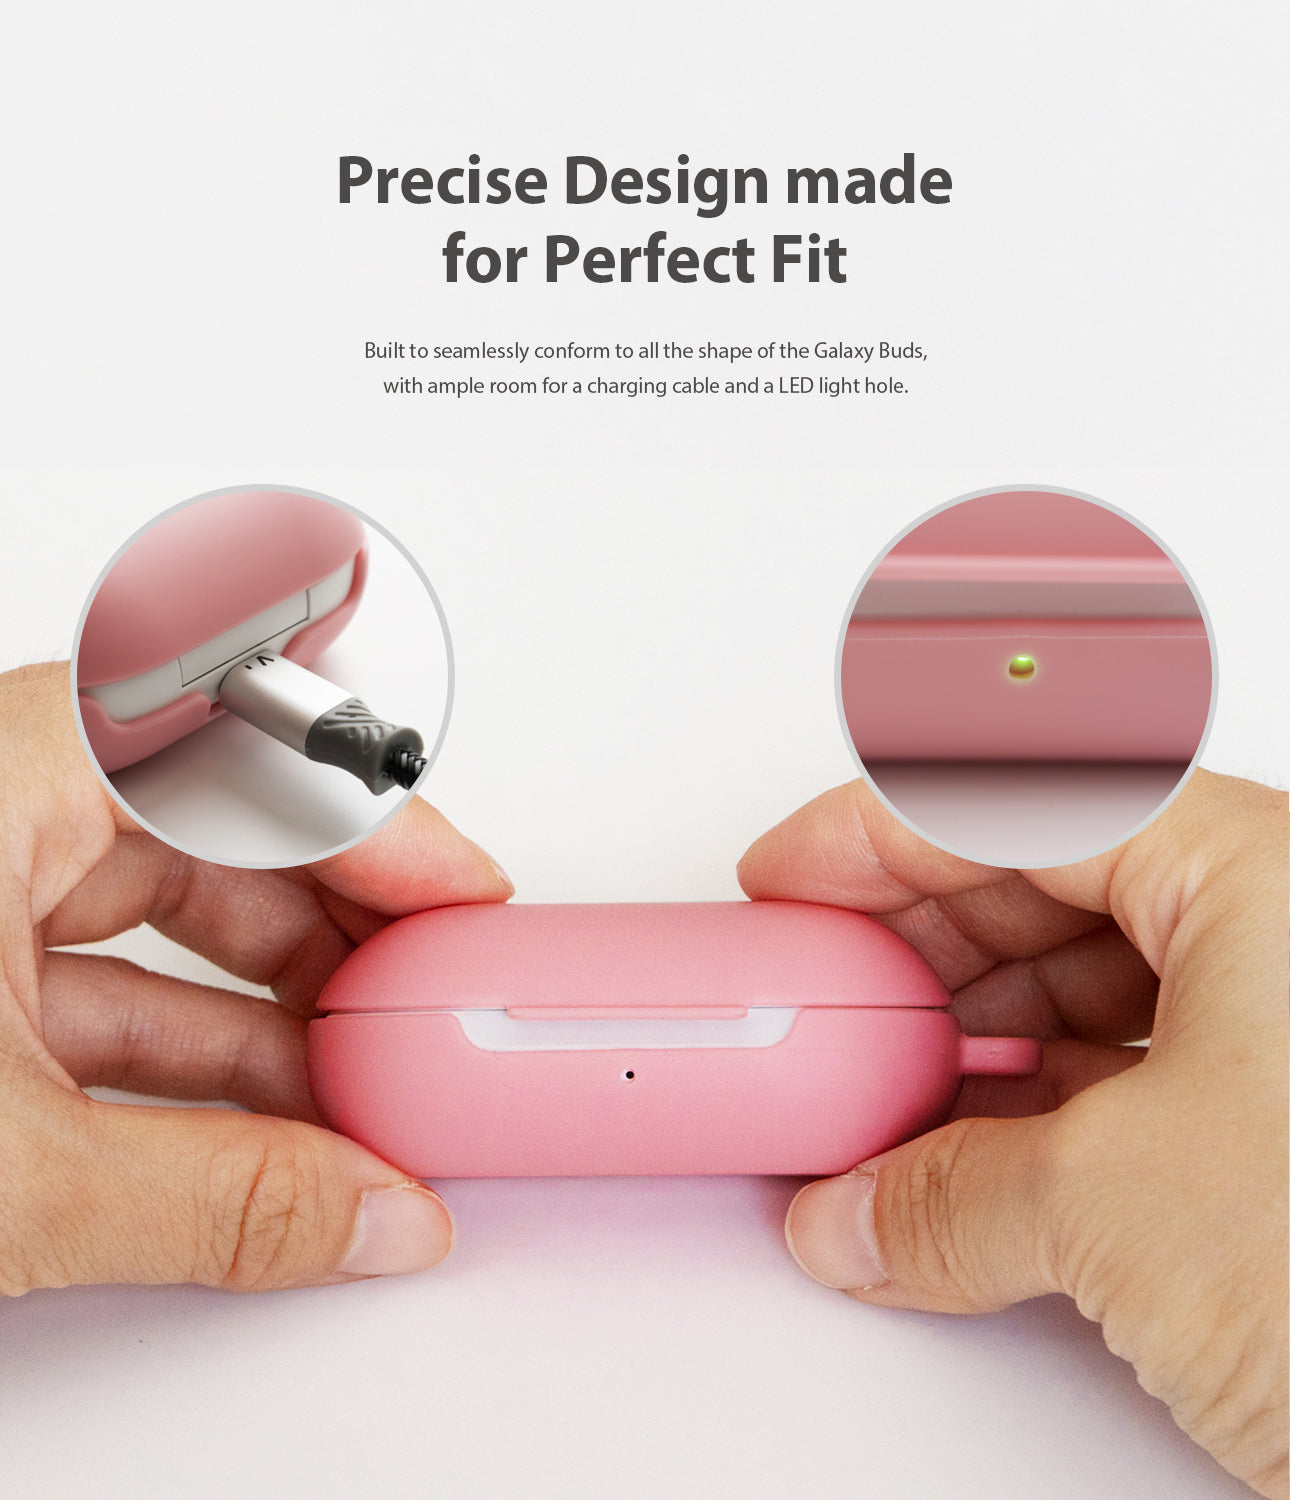 precise deign made for perfect fit built seamlessly conform to all the shape of the galaxy buds and buds plus